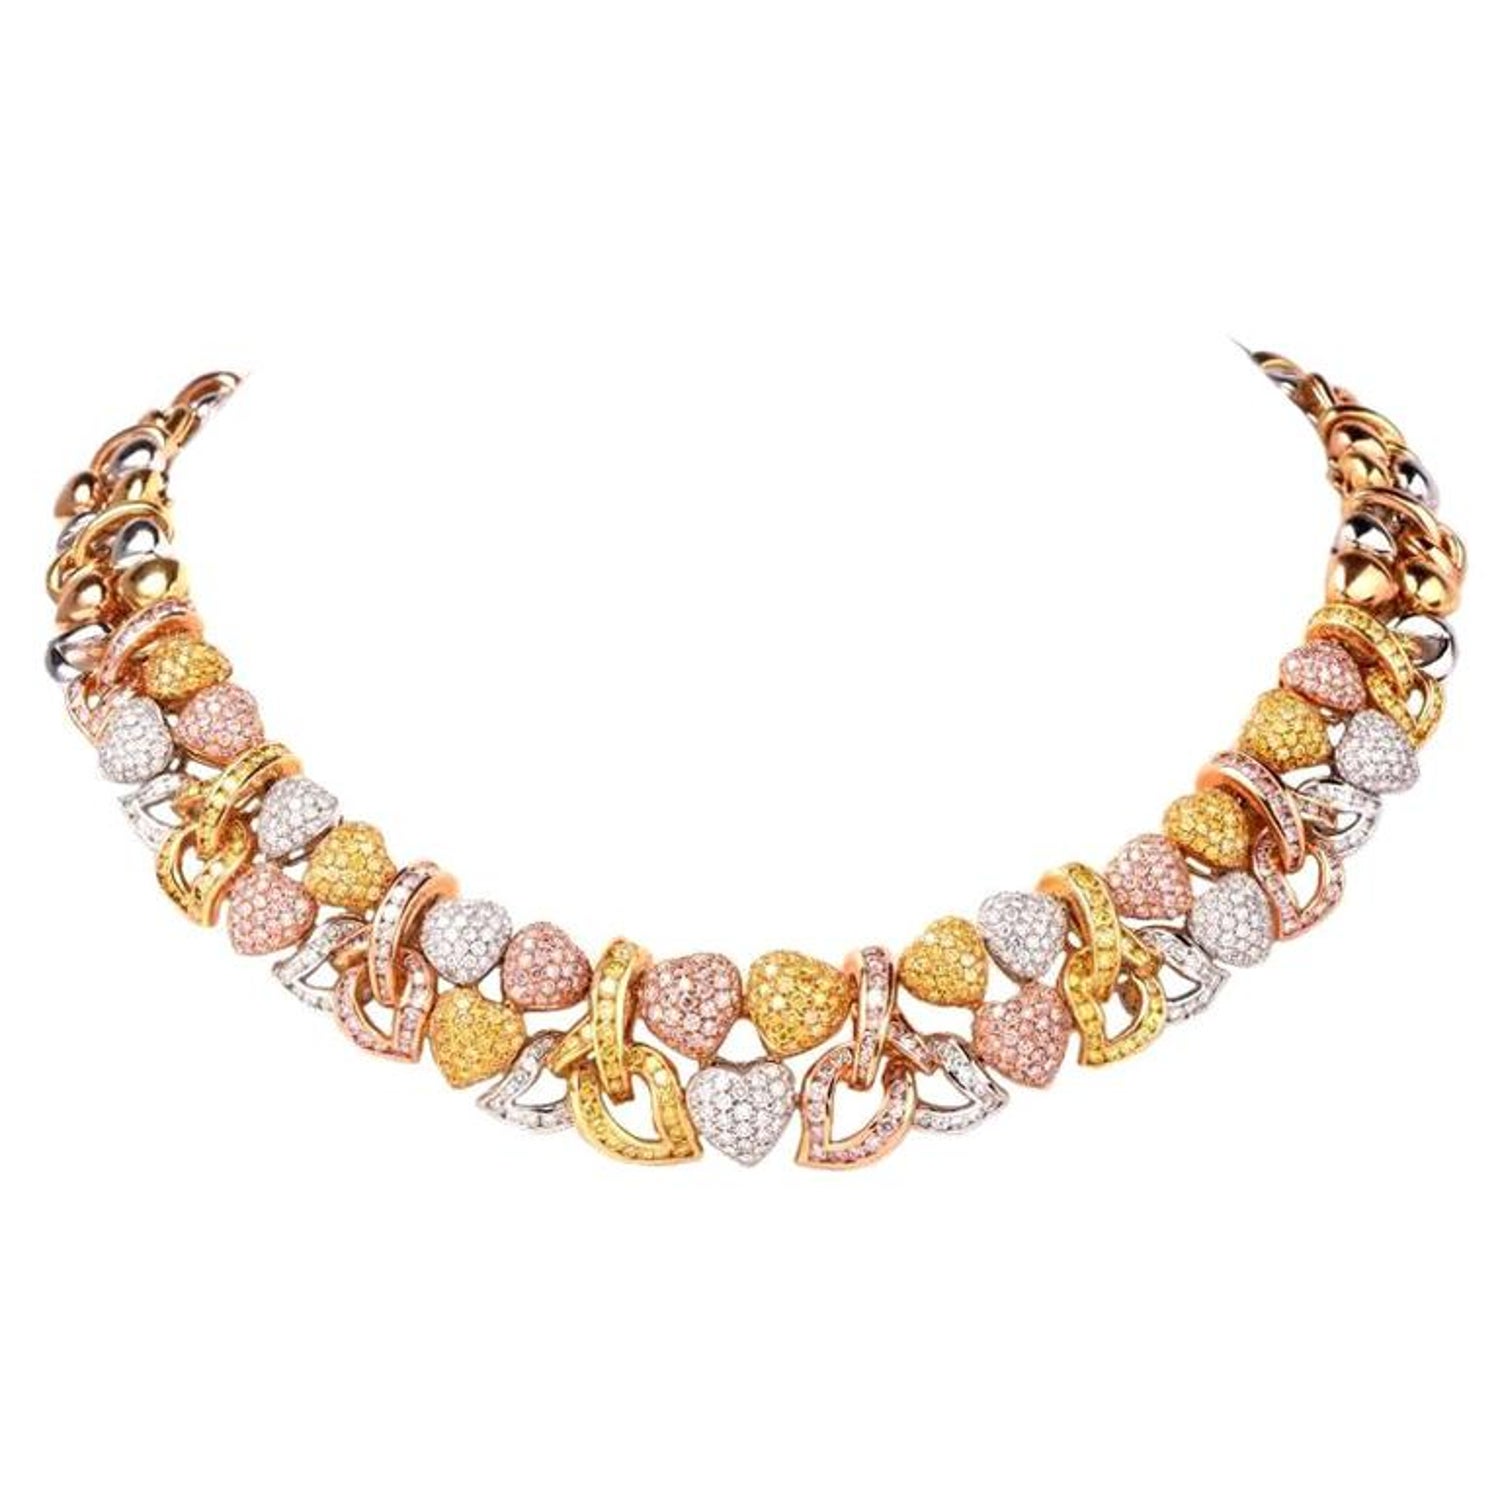 Antique Pink Diamond Choker Necklaces - 11 For Sale at 1stDibs